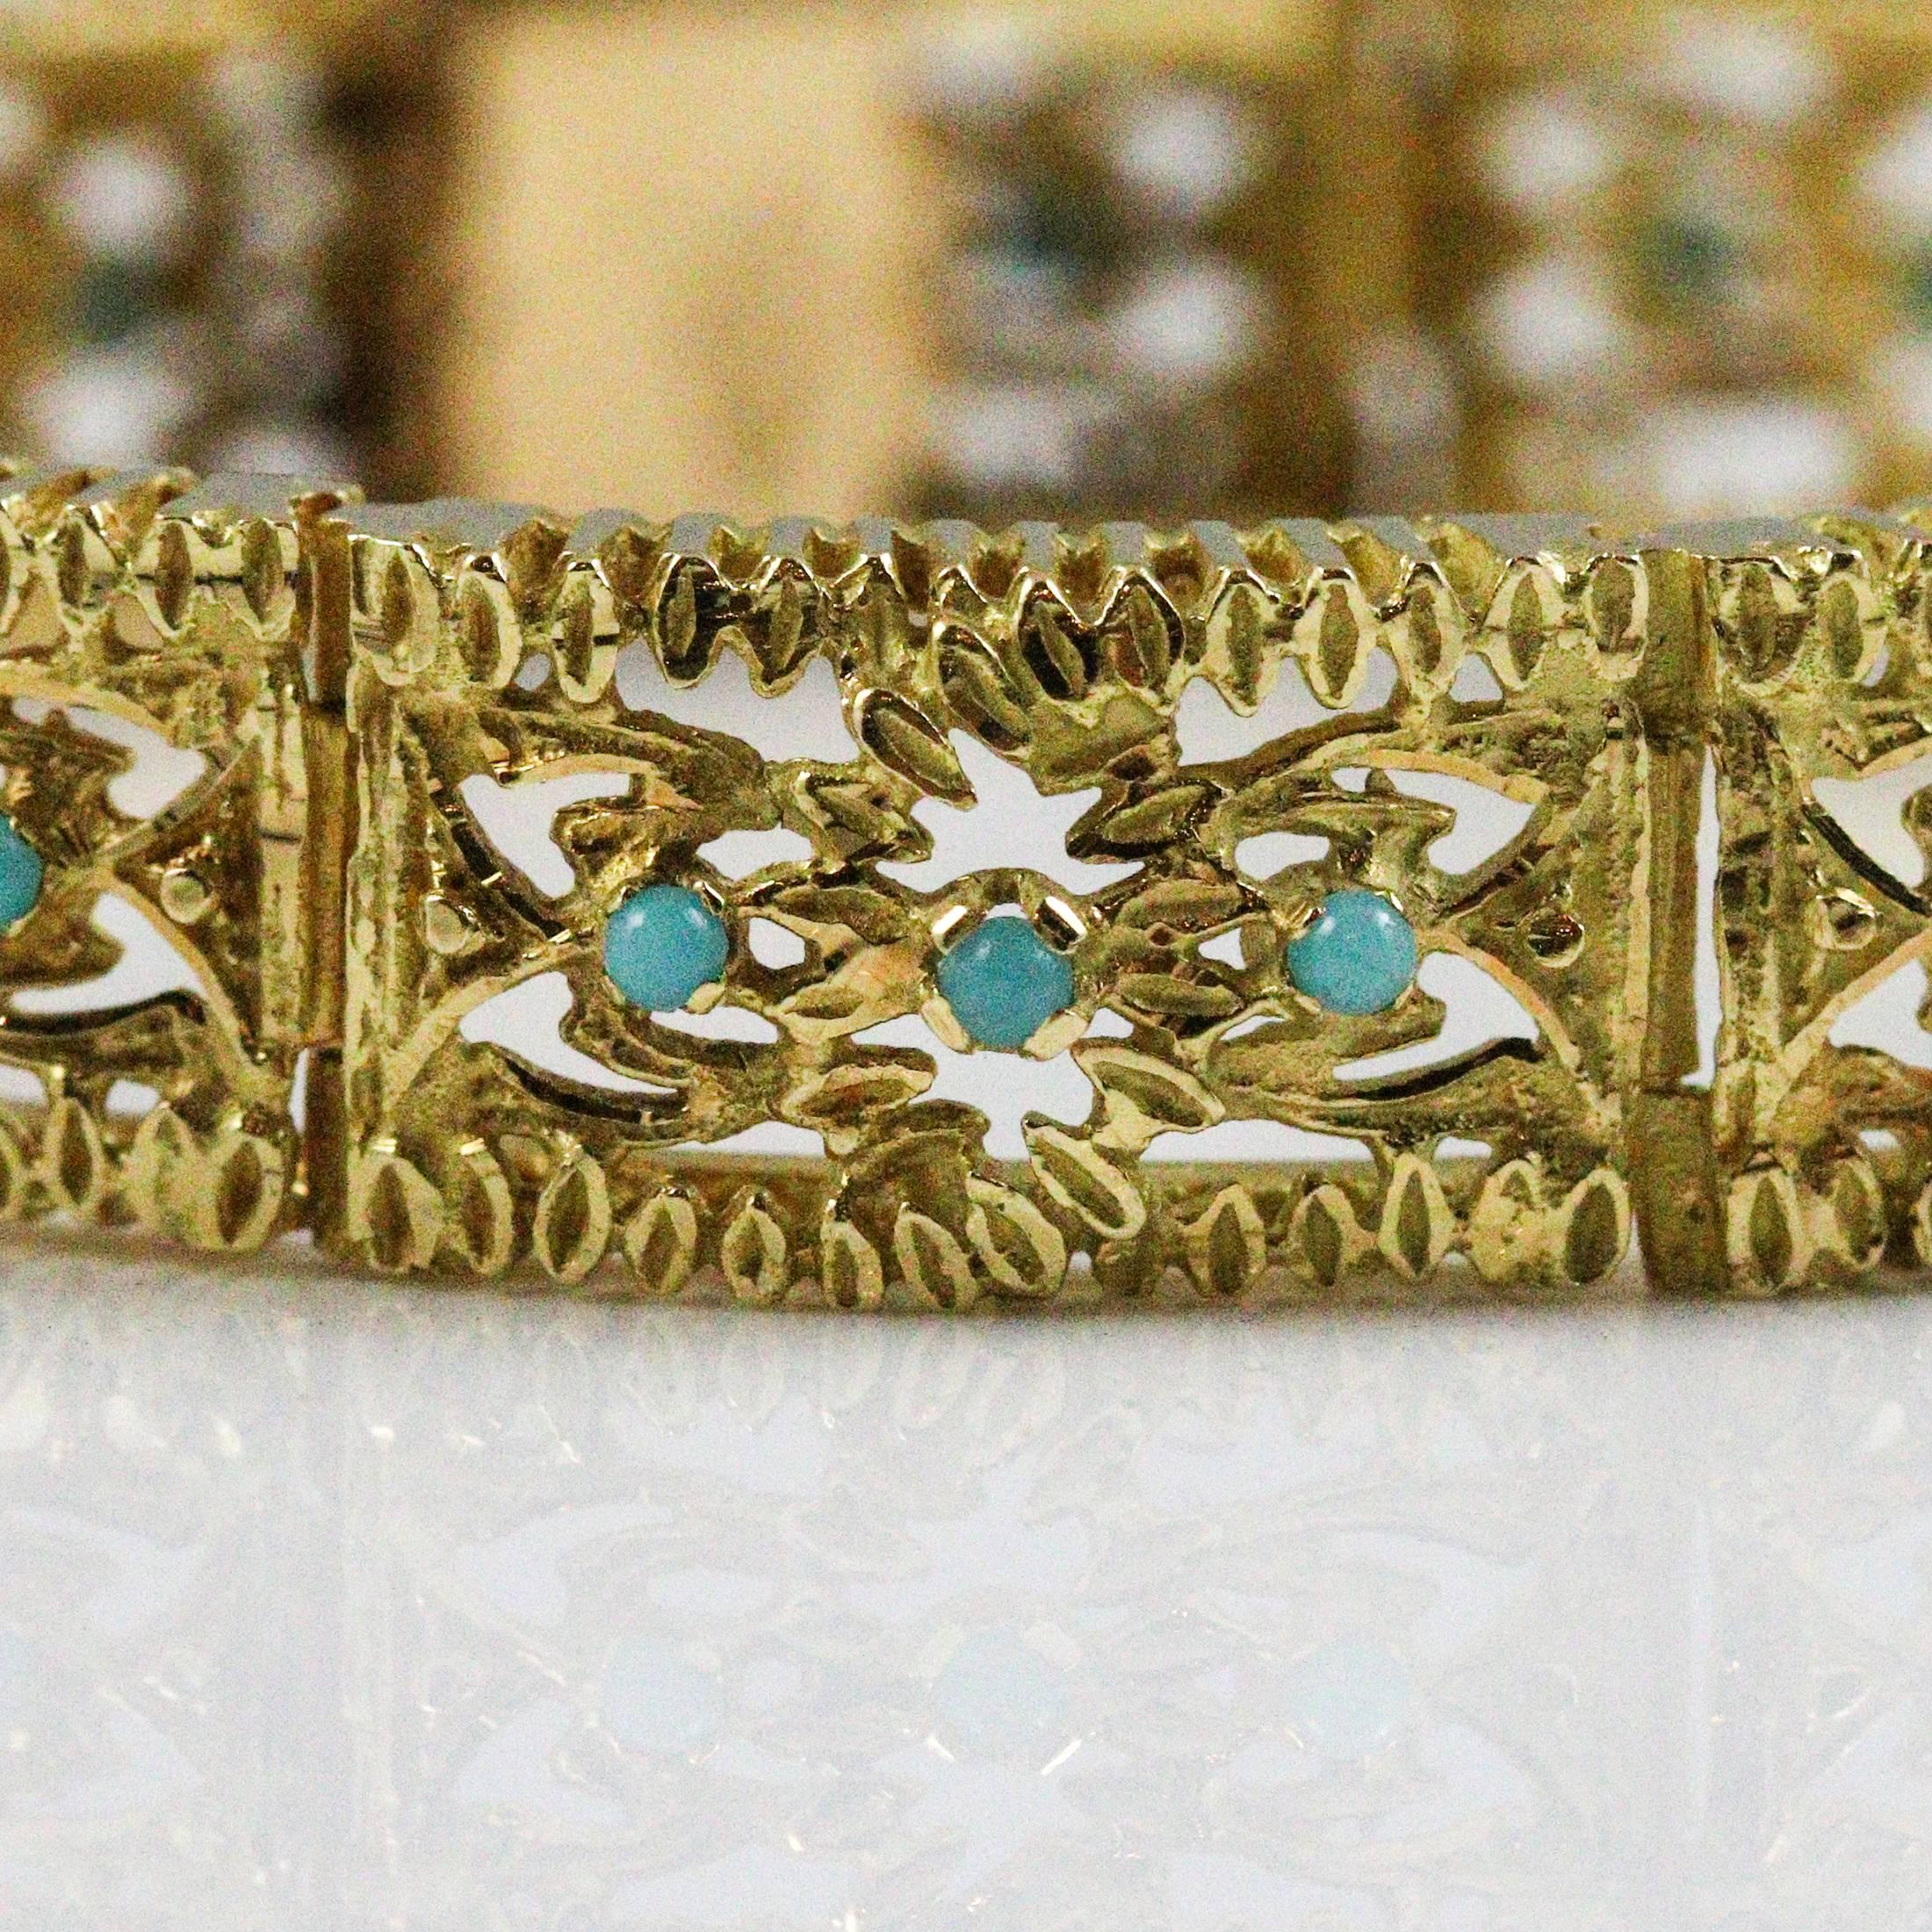 This beautiful 18k yellow gold bracelet features intricate filigree designed links, each one containing 3 small round Persian turquoise. The bracelet measure 11.8mm wide and 7.5 inches long. Each link is approximately 0.75 inches, so it could be